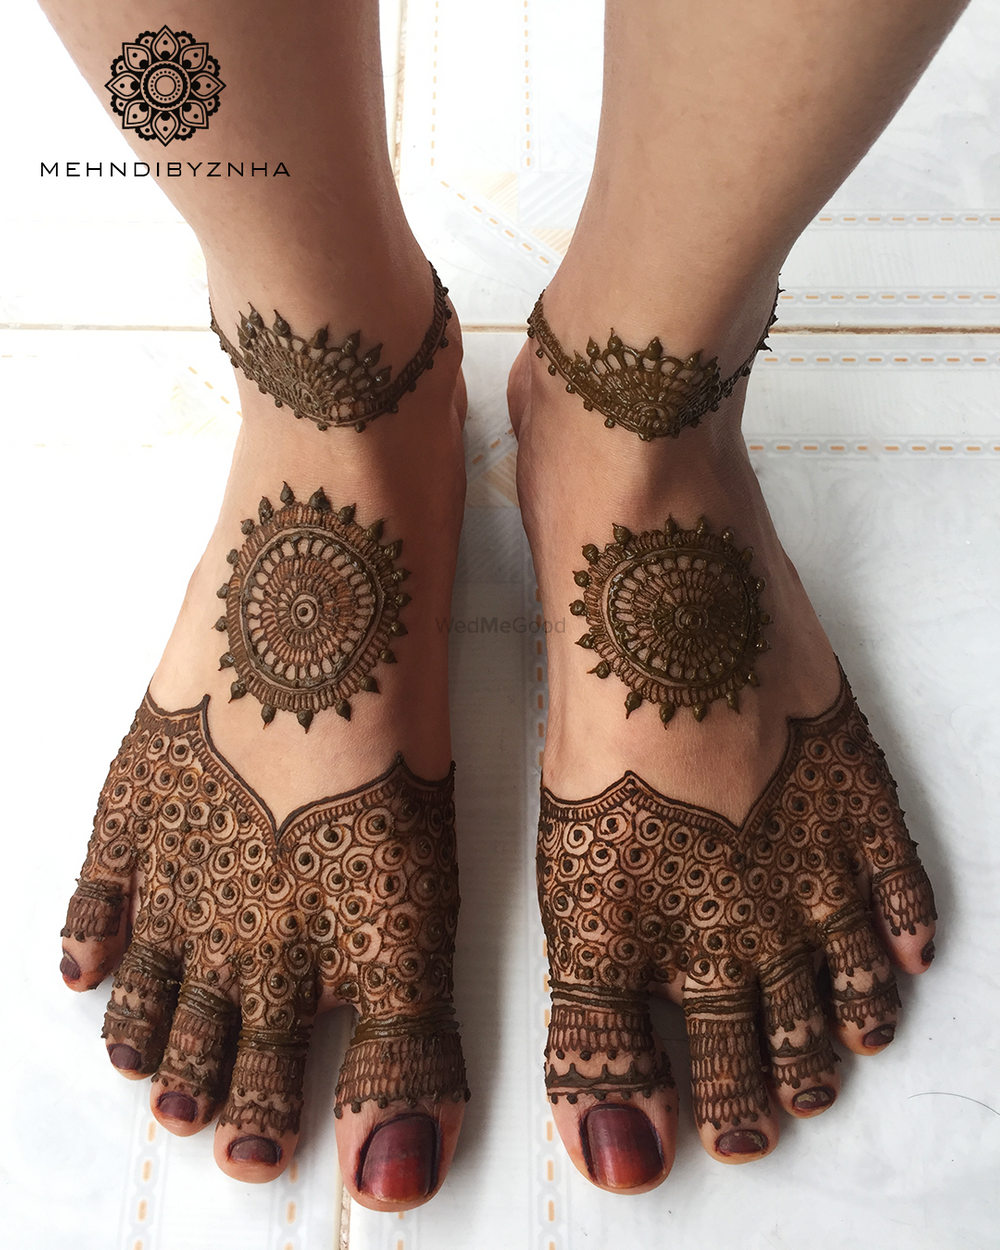 Photo From Amal - By Mehndi by ZNHA